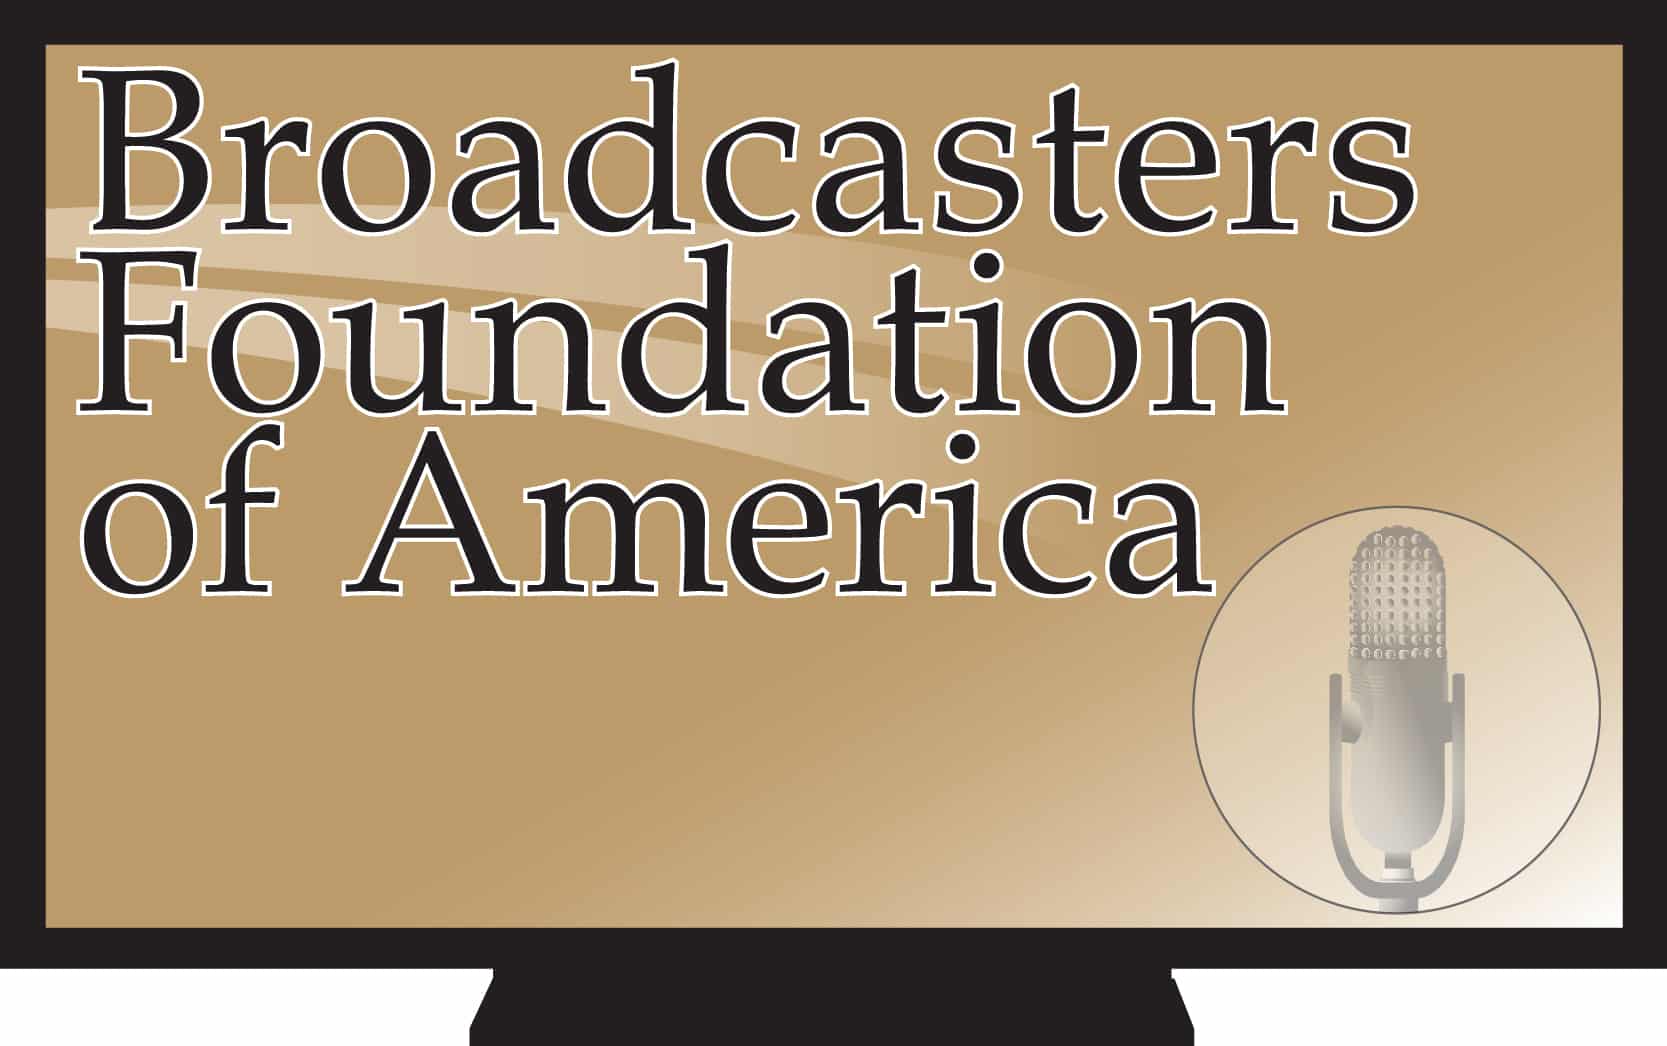 The Broadcasters Foundation Of America